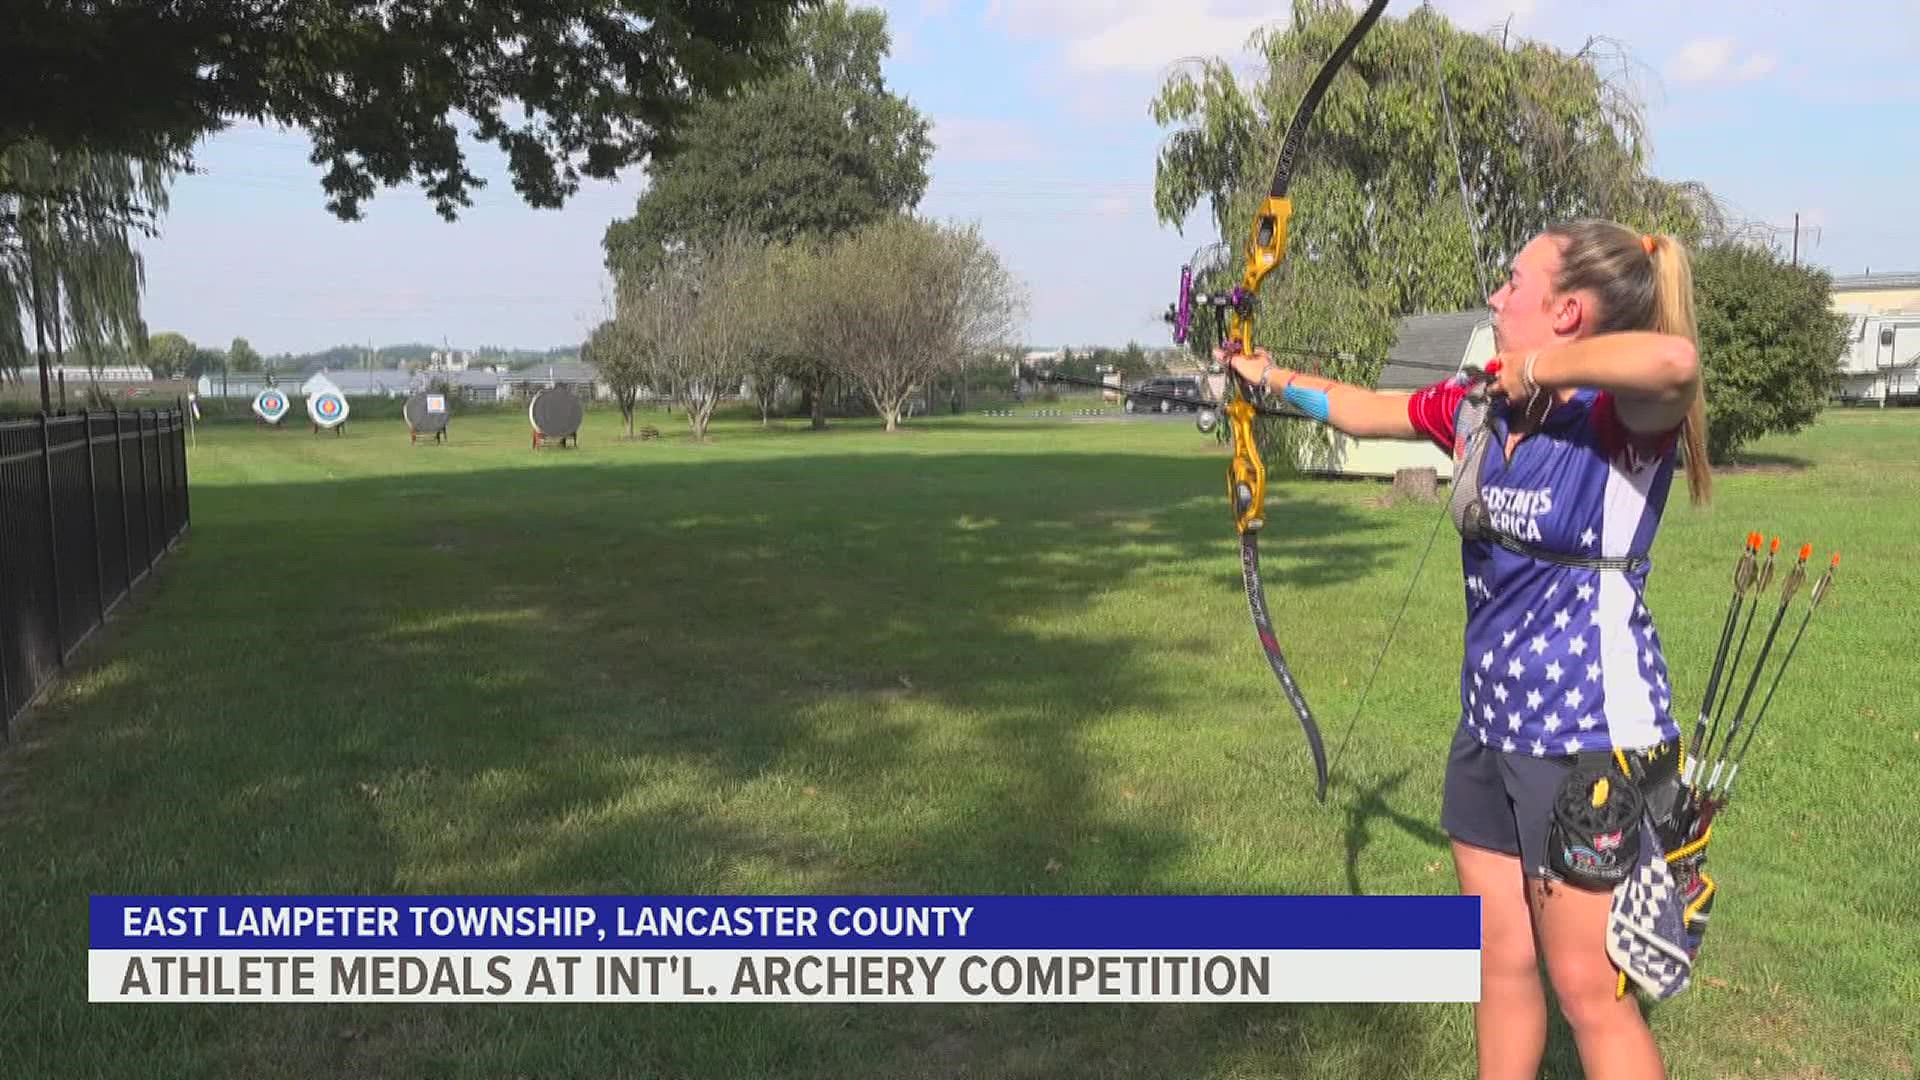 Casey Kaufhold, 17, of Lancaster County, won the silver medal at the Word Archery Championships in Yankton, South Dakota on Sept. 26.